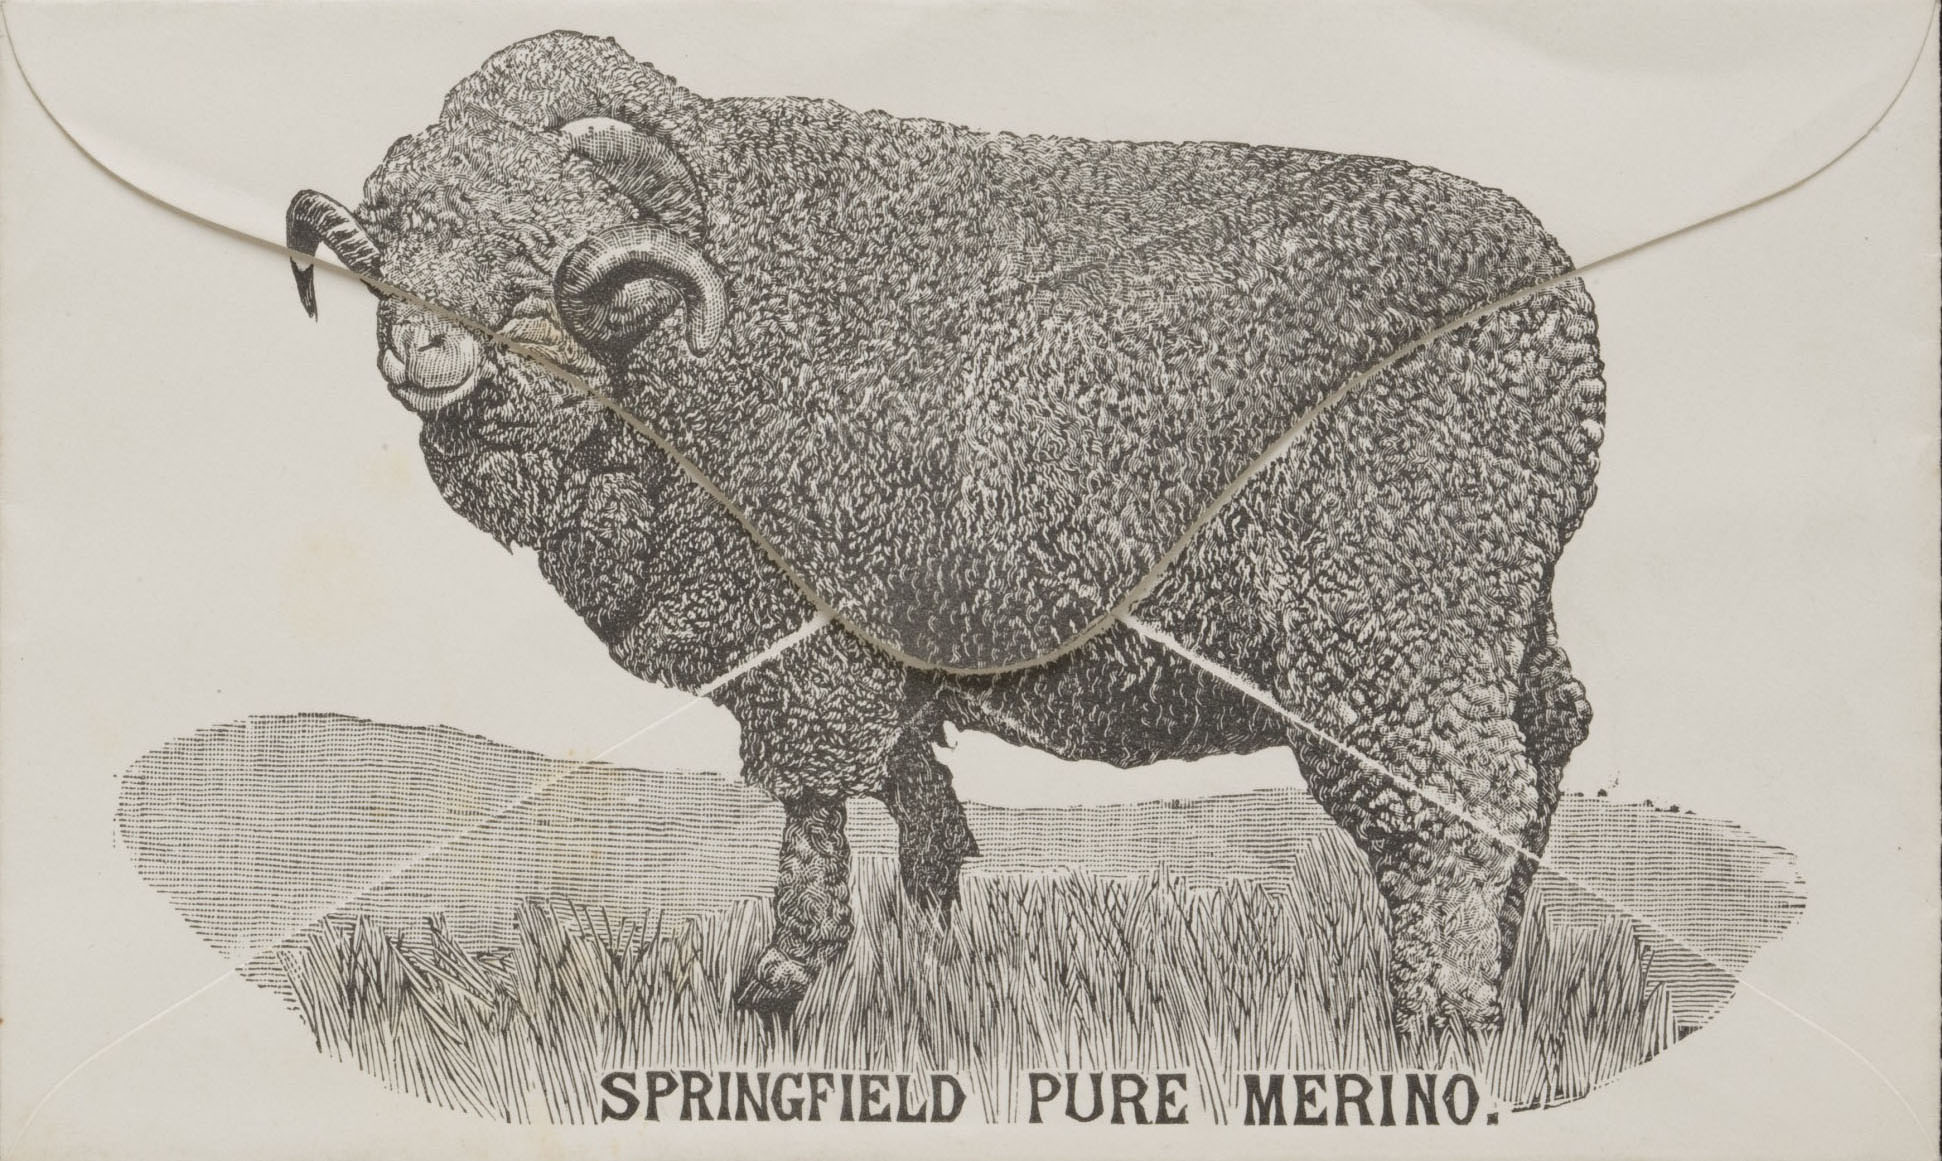 Envelope with an illustration of a merino ram on it.